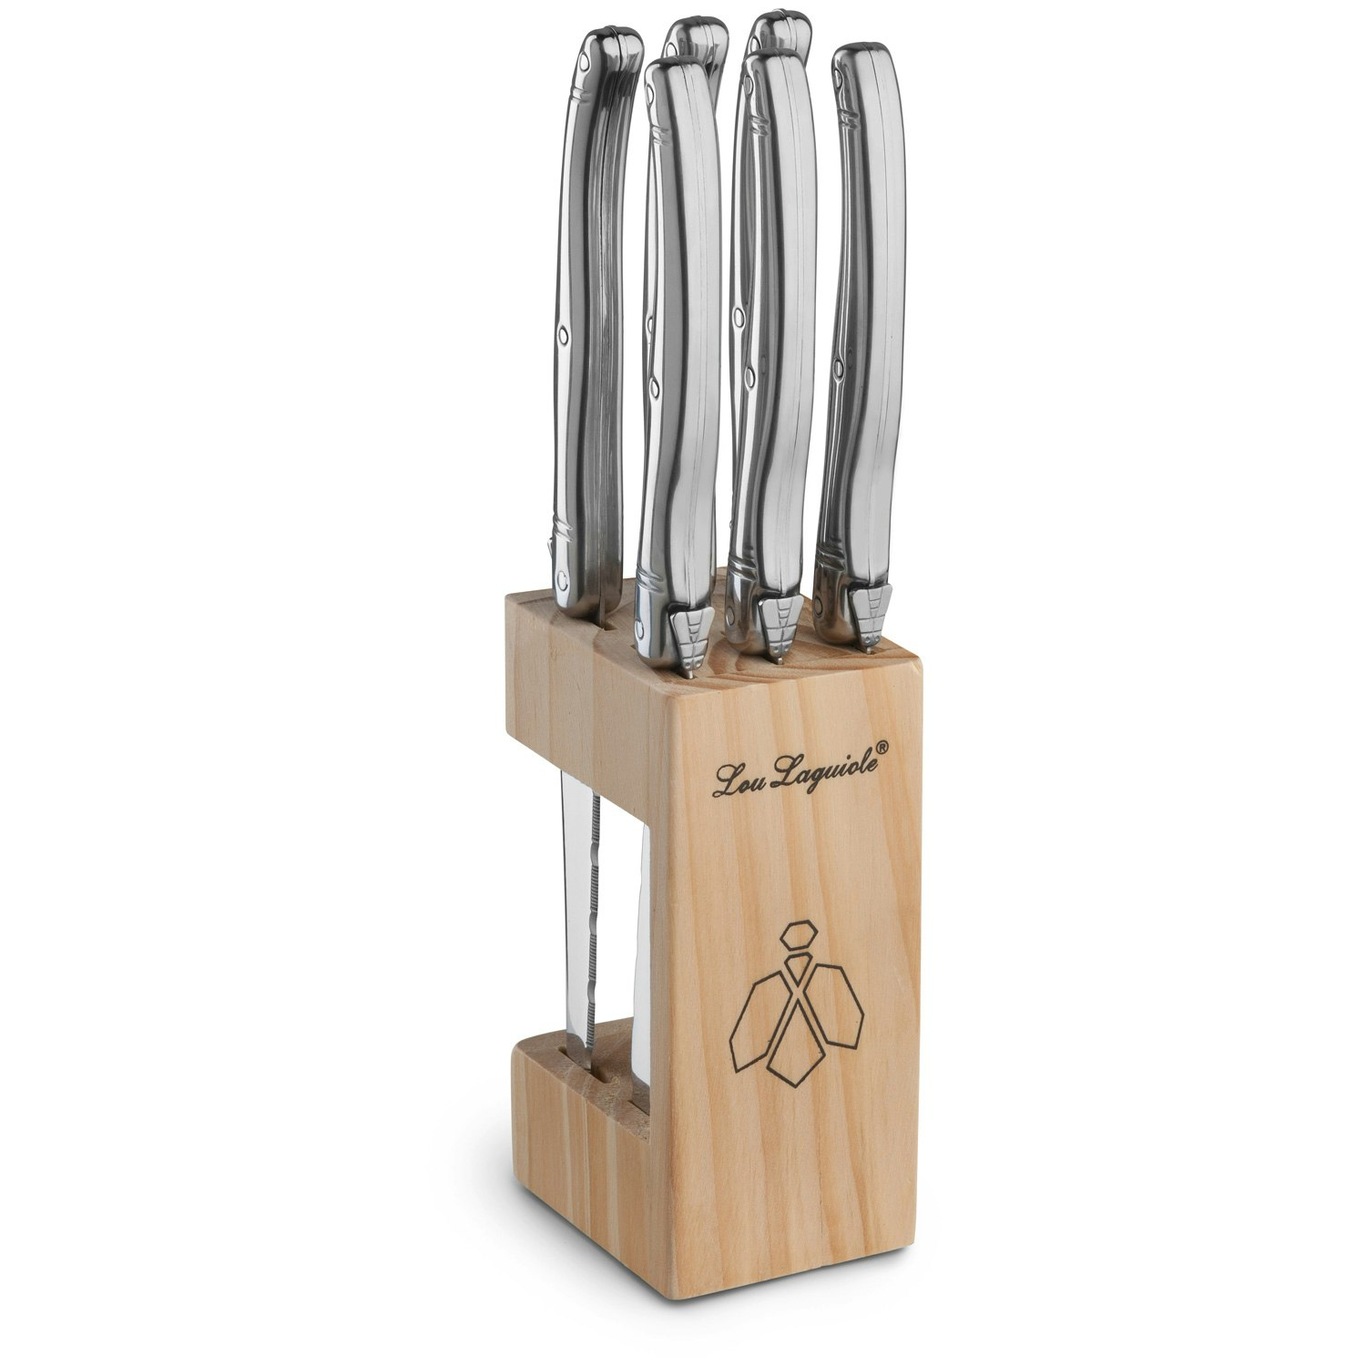 https://royaldesign.com/image/2/lou-laguiole-tradition-grill-knives-with-knife-block-6-pack-11?w=800&quality=80